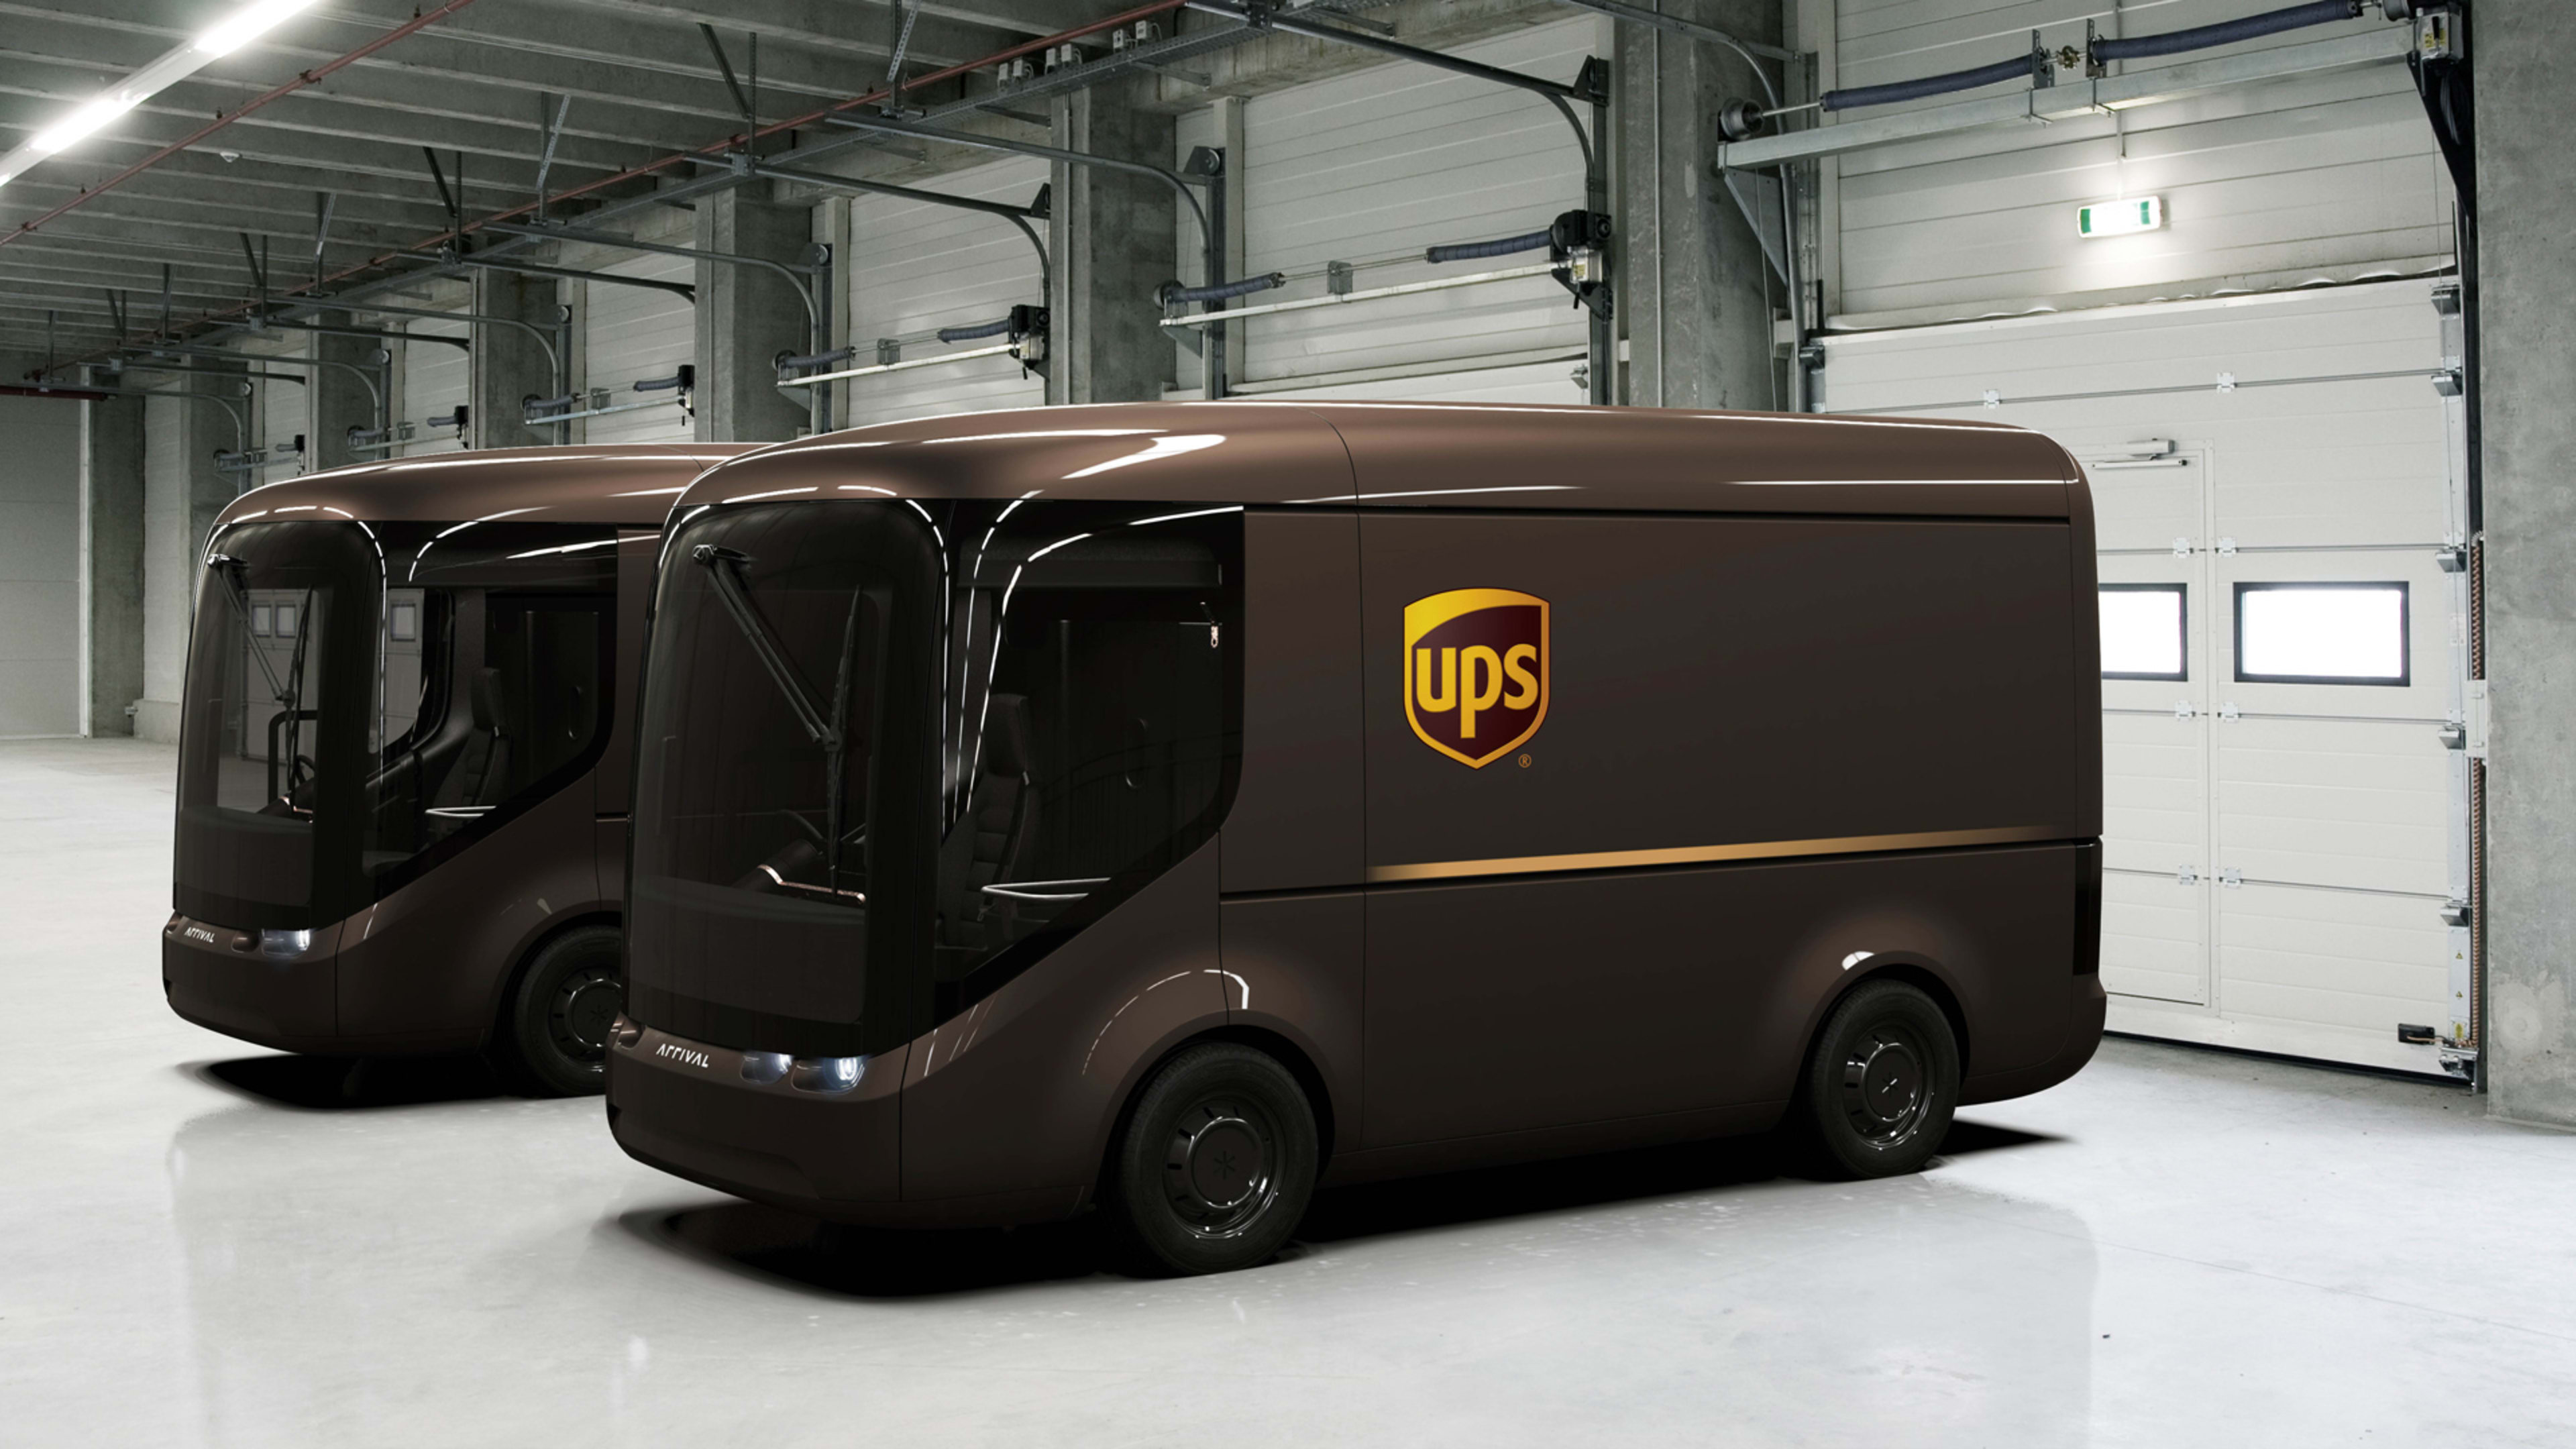 Your UPS deliveries may soon arrive in electric trucks